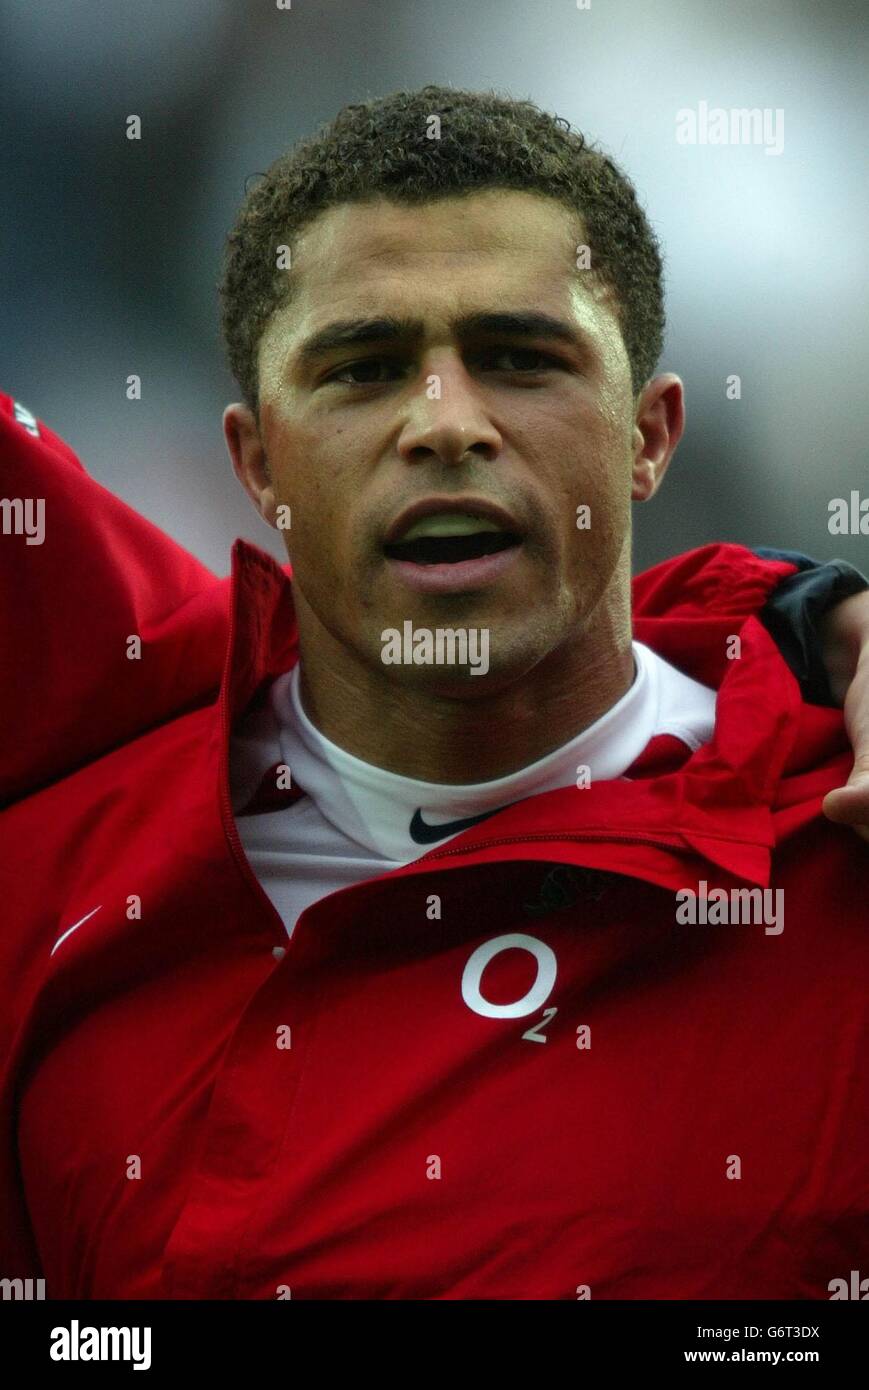 Jason Robinson, pictured before the England v Italy RBS 6 Nations match. 08/11/04: Jason Robinson who expected to be named as England captain for the autumn Test series opener against Canada at Twickenham. The Sale Sharks skipper and former rugby league star appears to have seen off rival challengers like Bath pair Mike Tindall and Steve Borthwick. Stock Photo